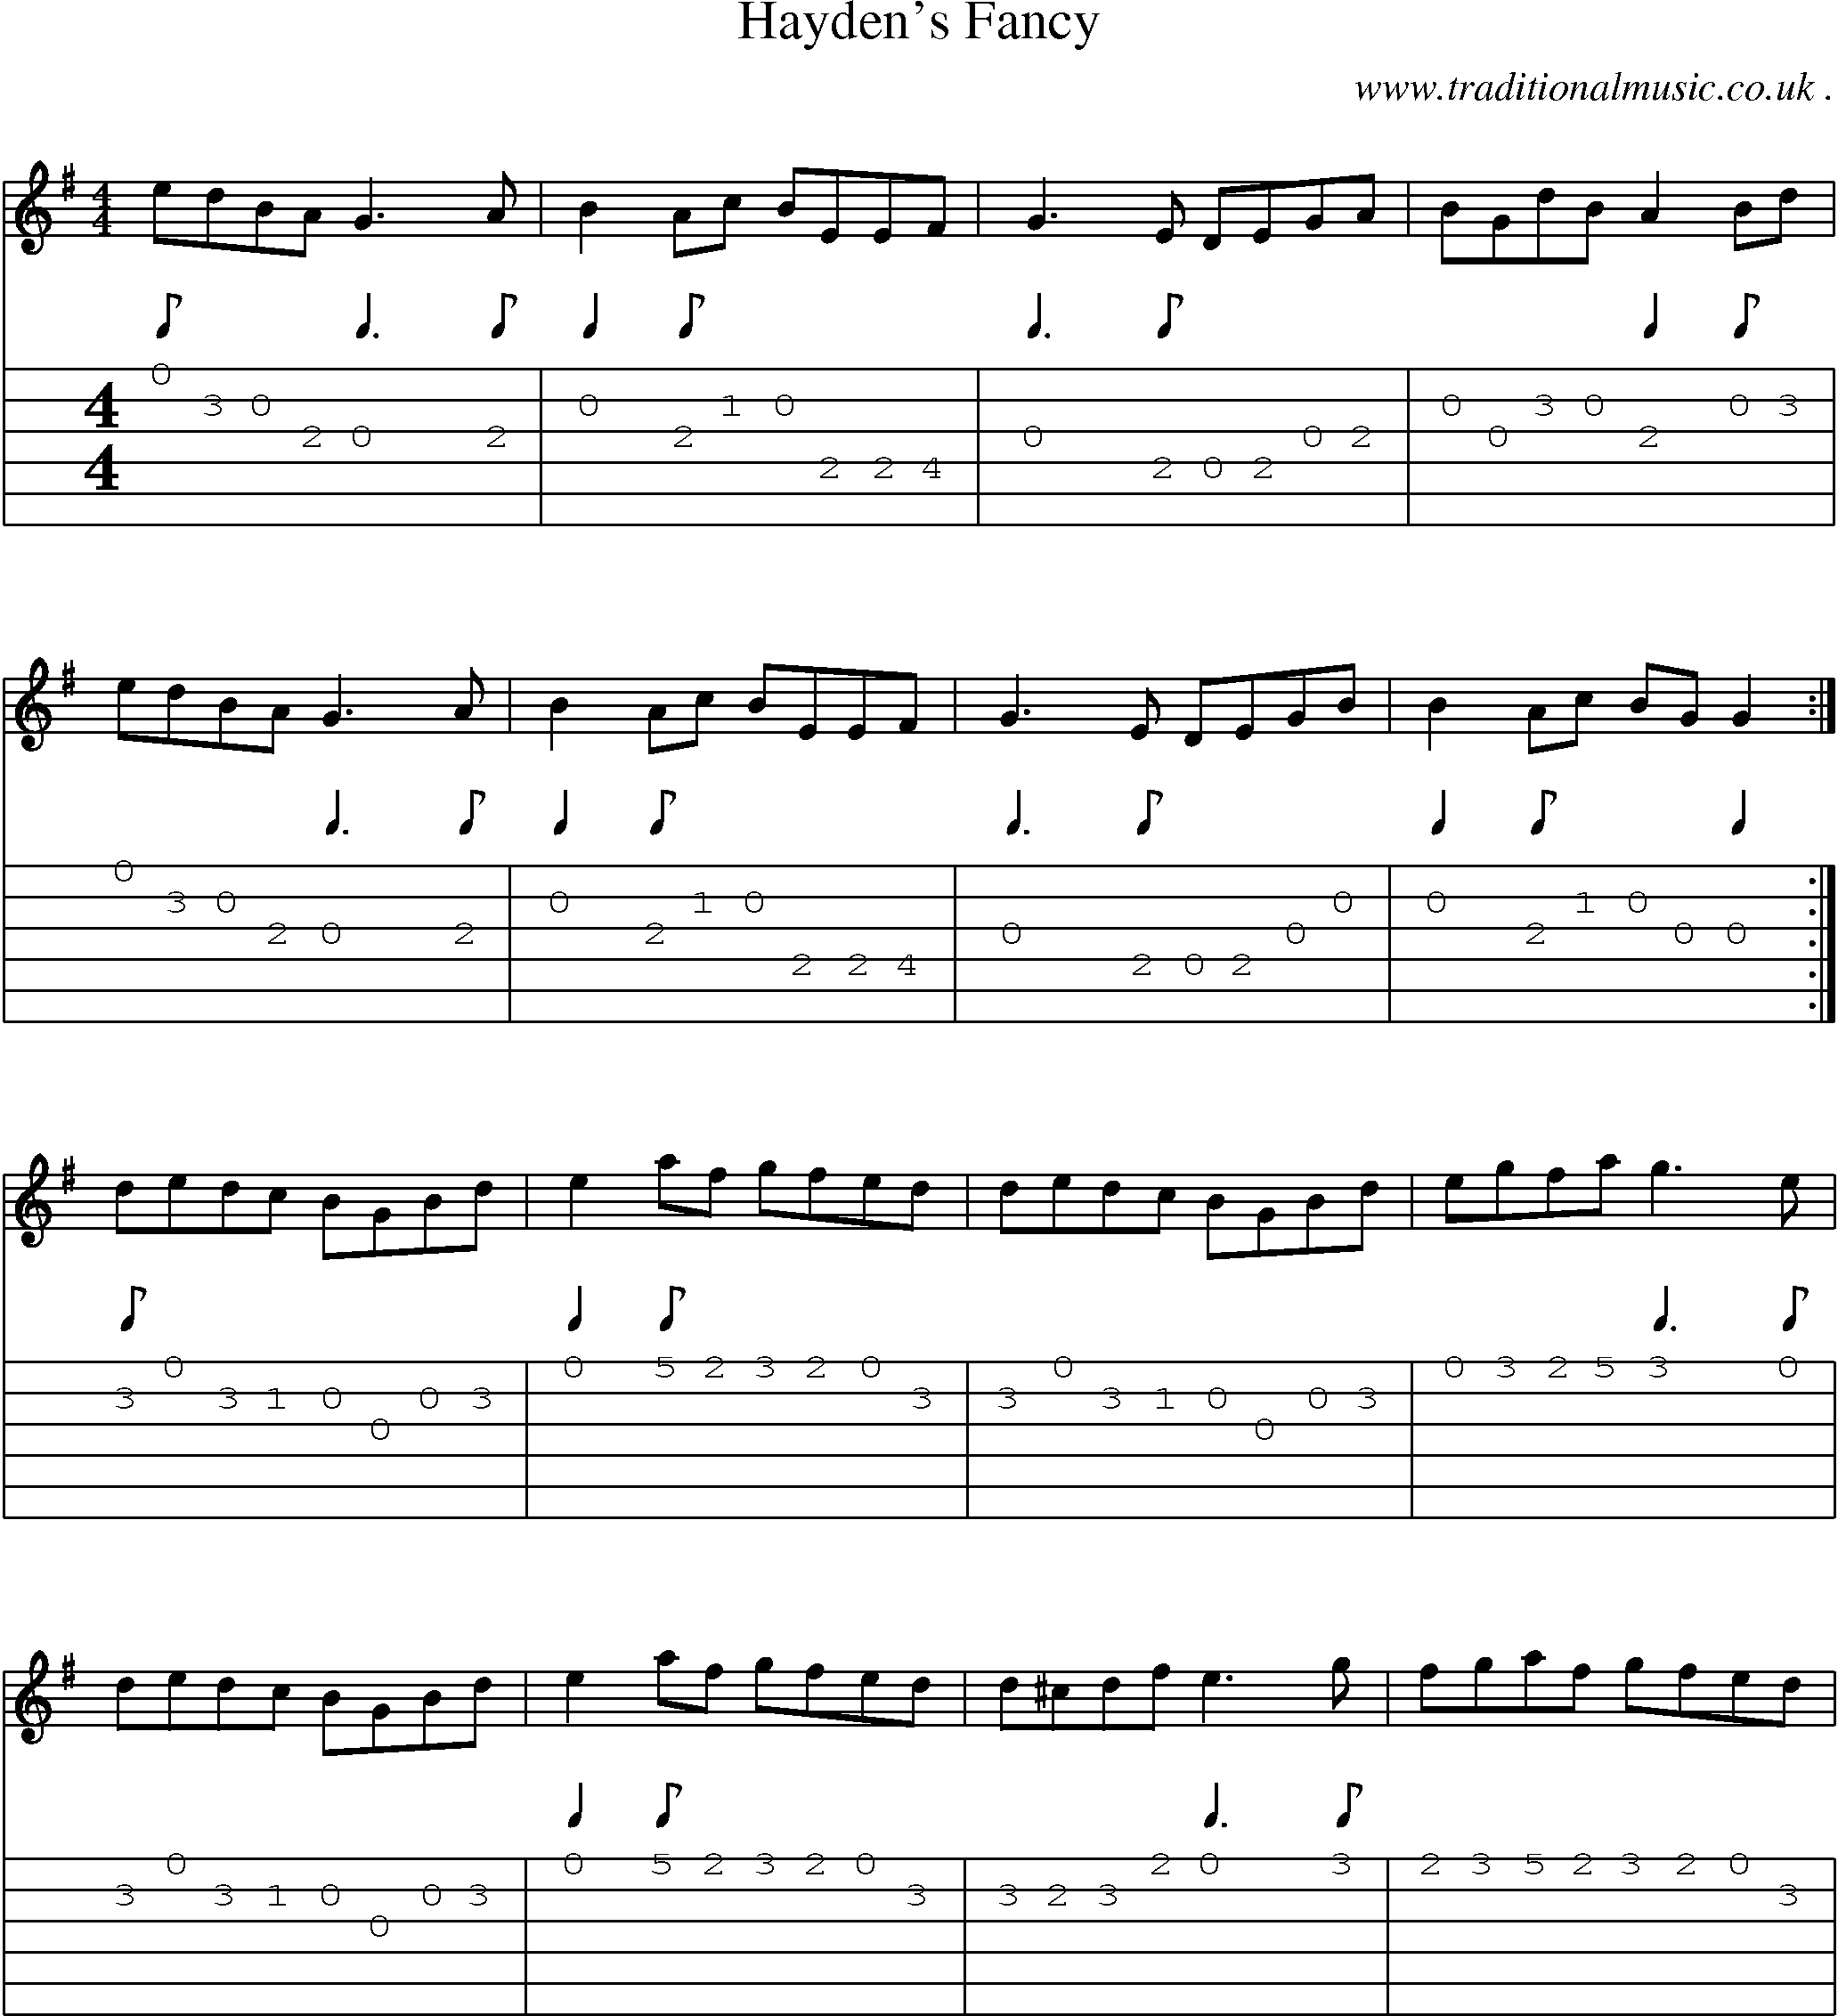 Sheet-Music and Guitar Tabs for Haydens Fancy